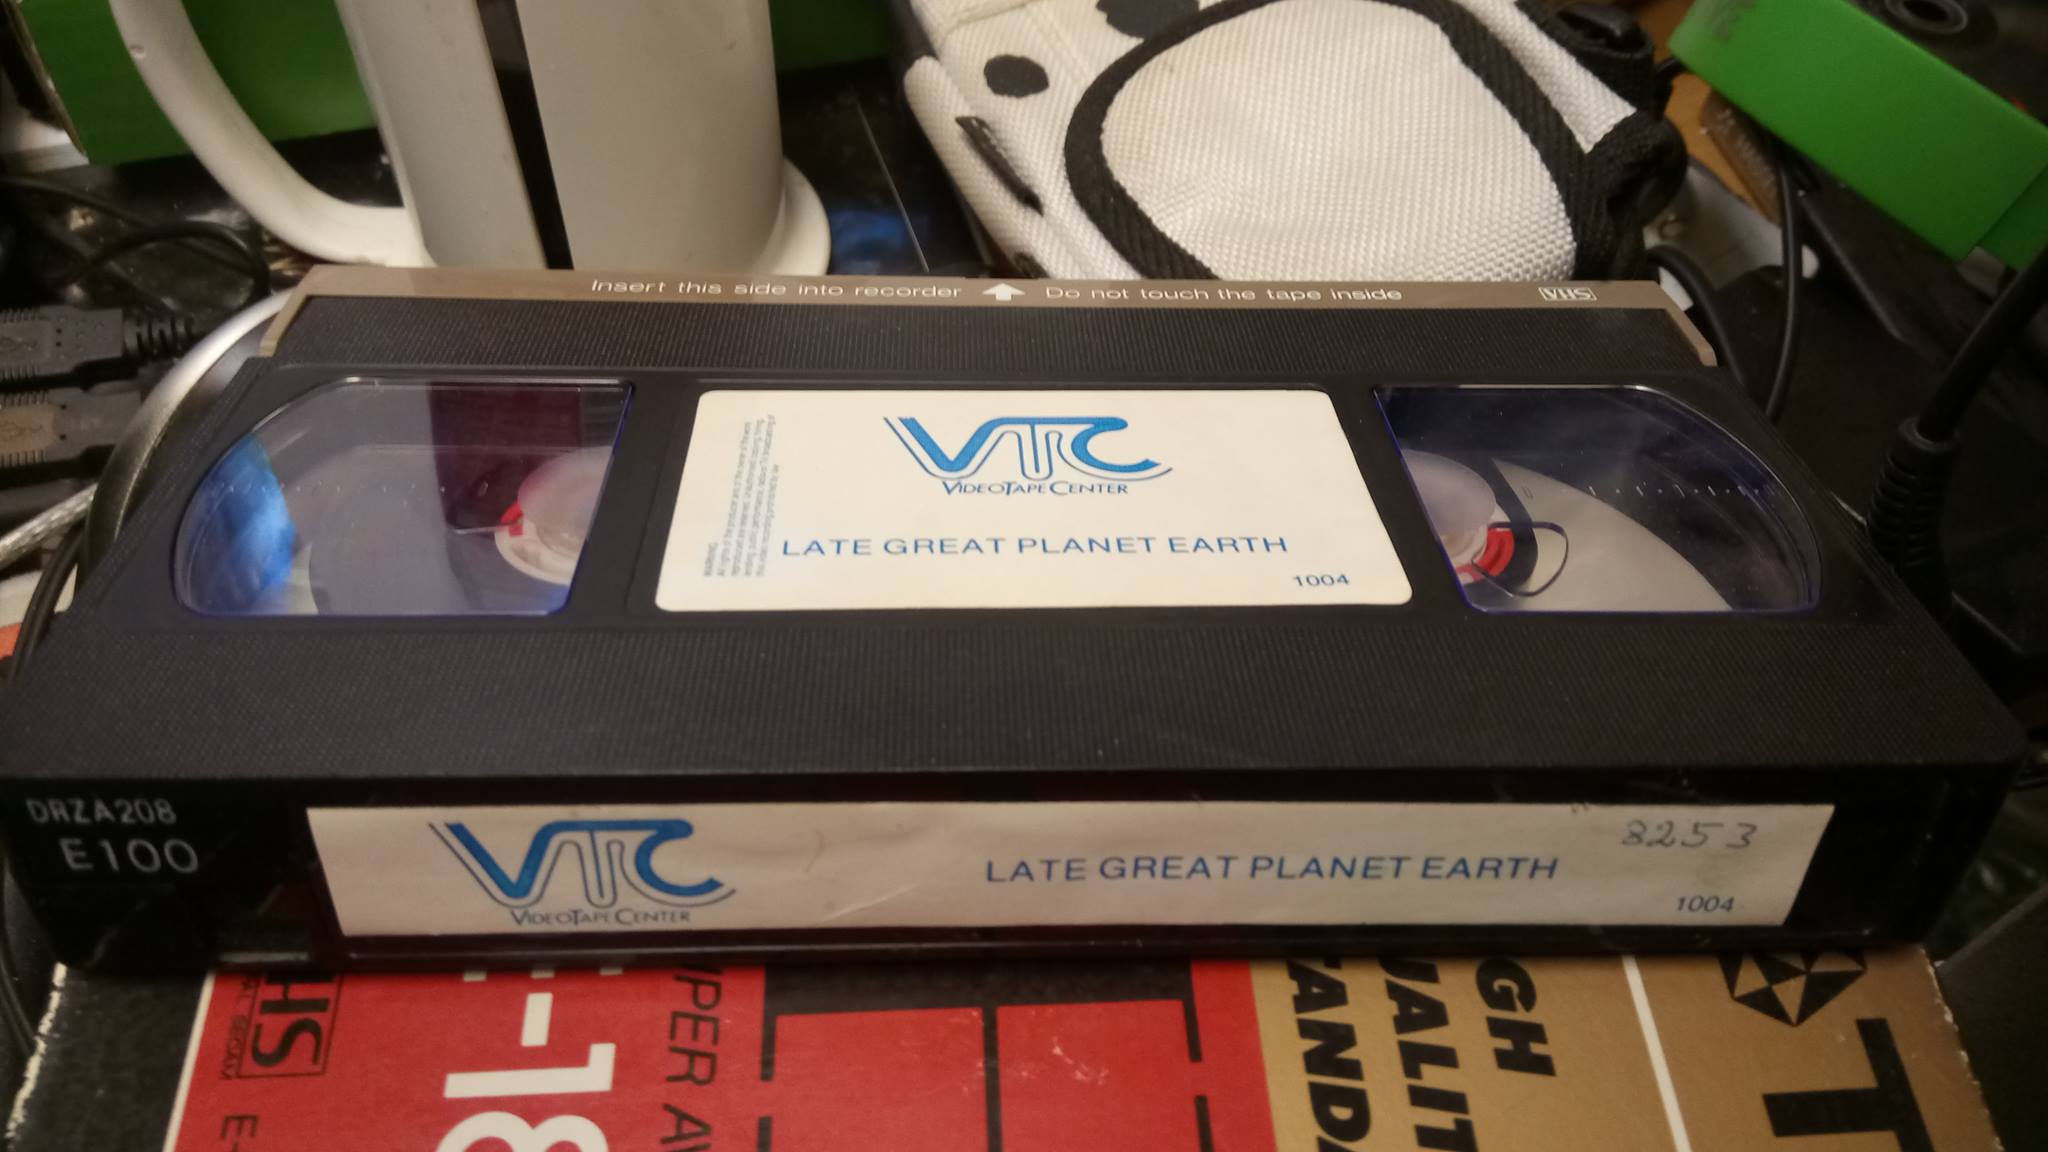 LATE GREAT PLANET EARTH